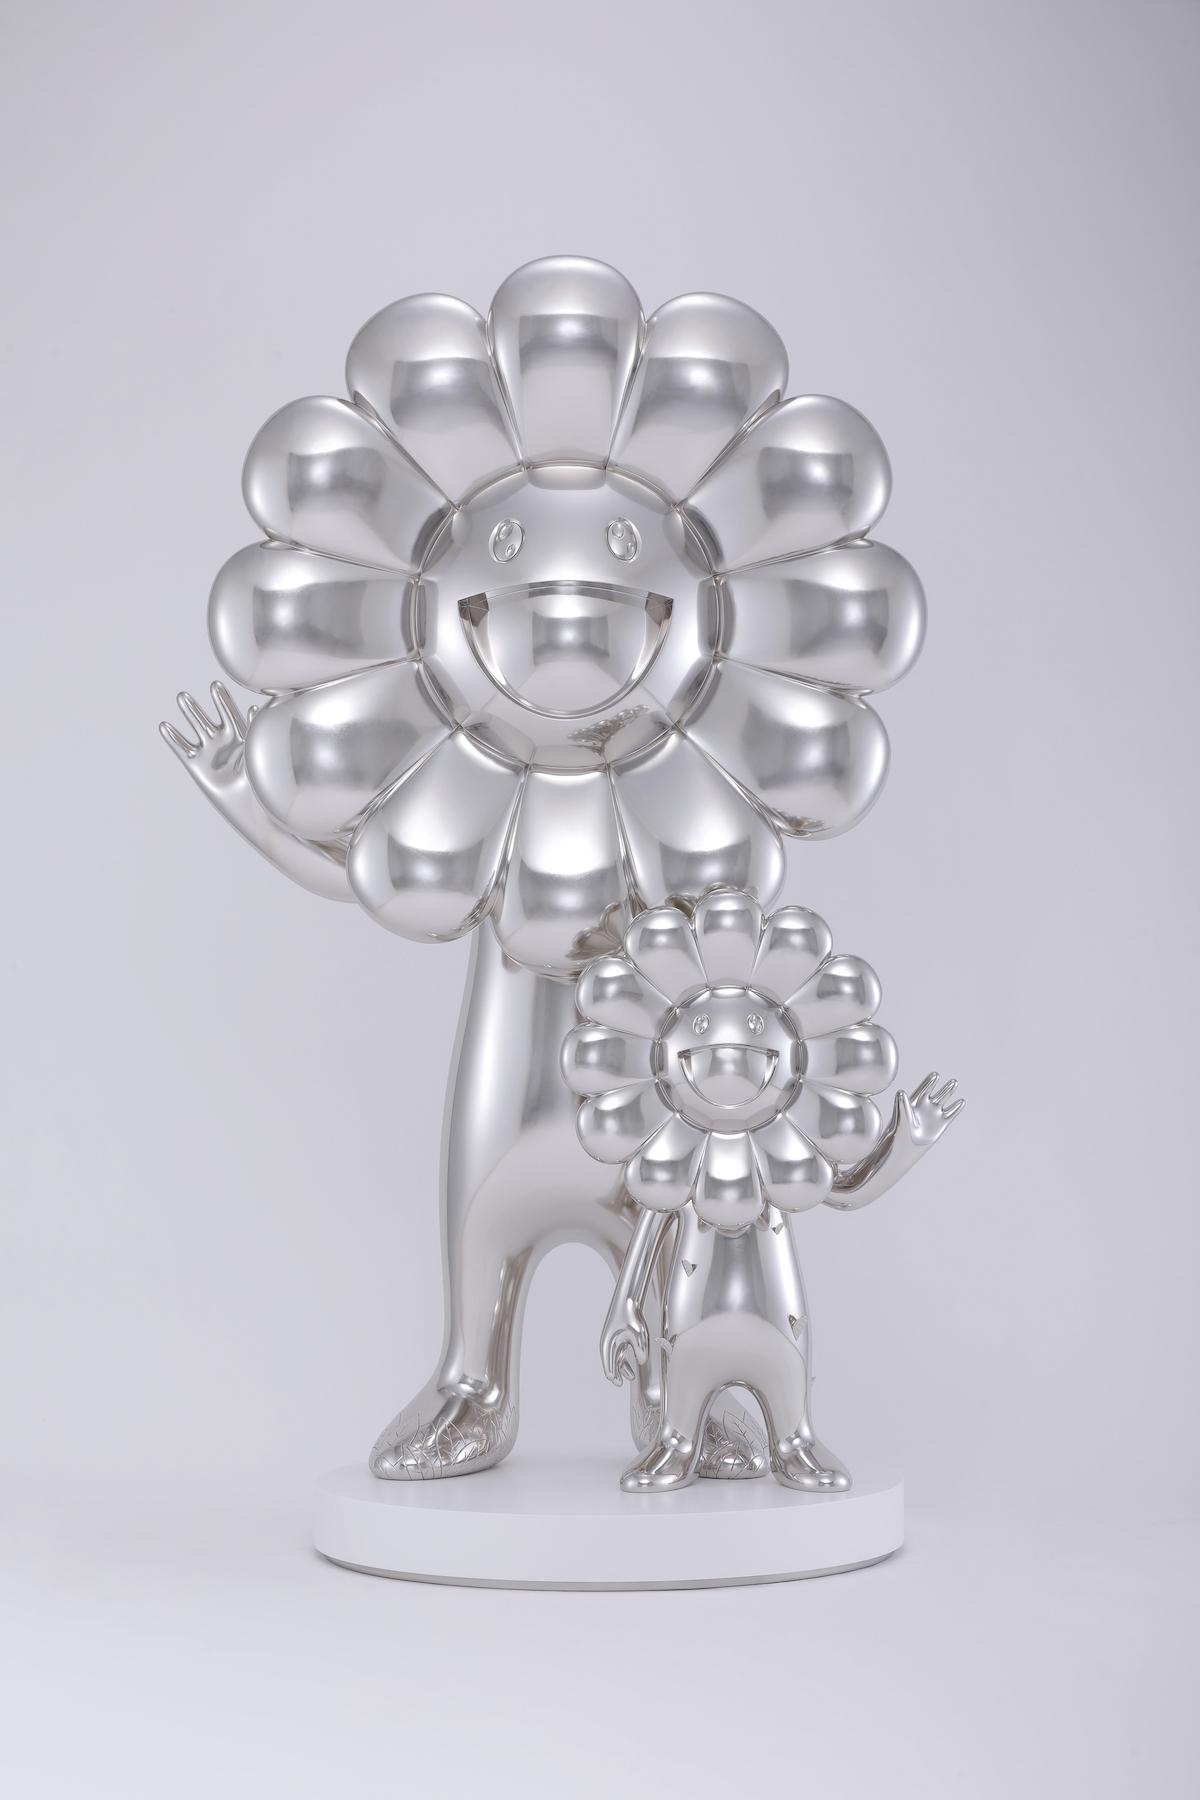 Takashi Murakami, Together with the Flower Parent and Child, 2021- 2023. Platinum leaf on FRP, wooden pedestal. Sculpture: 184.9 x 123.1 x 59.1 cm, Pedestal: 12 x 90 x 90 cm. © 2021-2023 Takashi Murakami/Kaikai Kiki Co., Ltd. All Rights Reserved. Courtesy of the artist and Perrotin, Paris, New York, Hong Kong, Shanghai, Tokyo, Seoul and Dubai